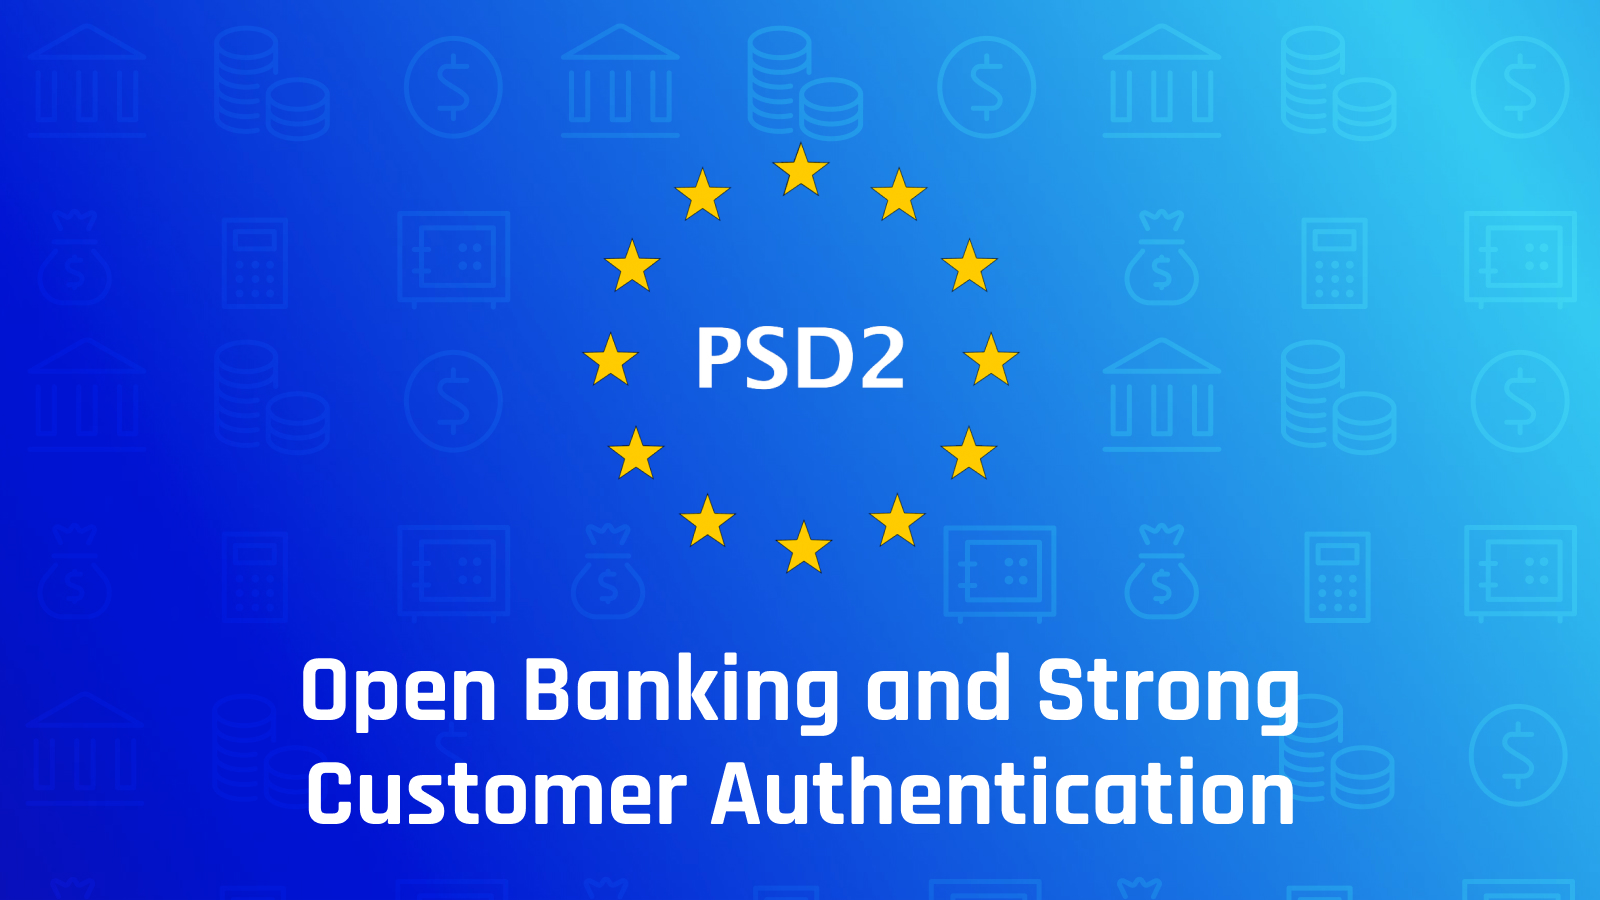 Open Banking, PSD2 and Achieving Strong Customer Authentication